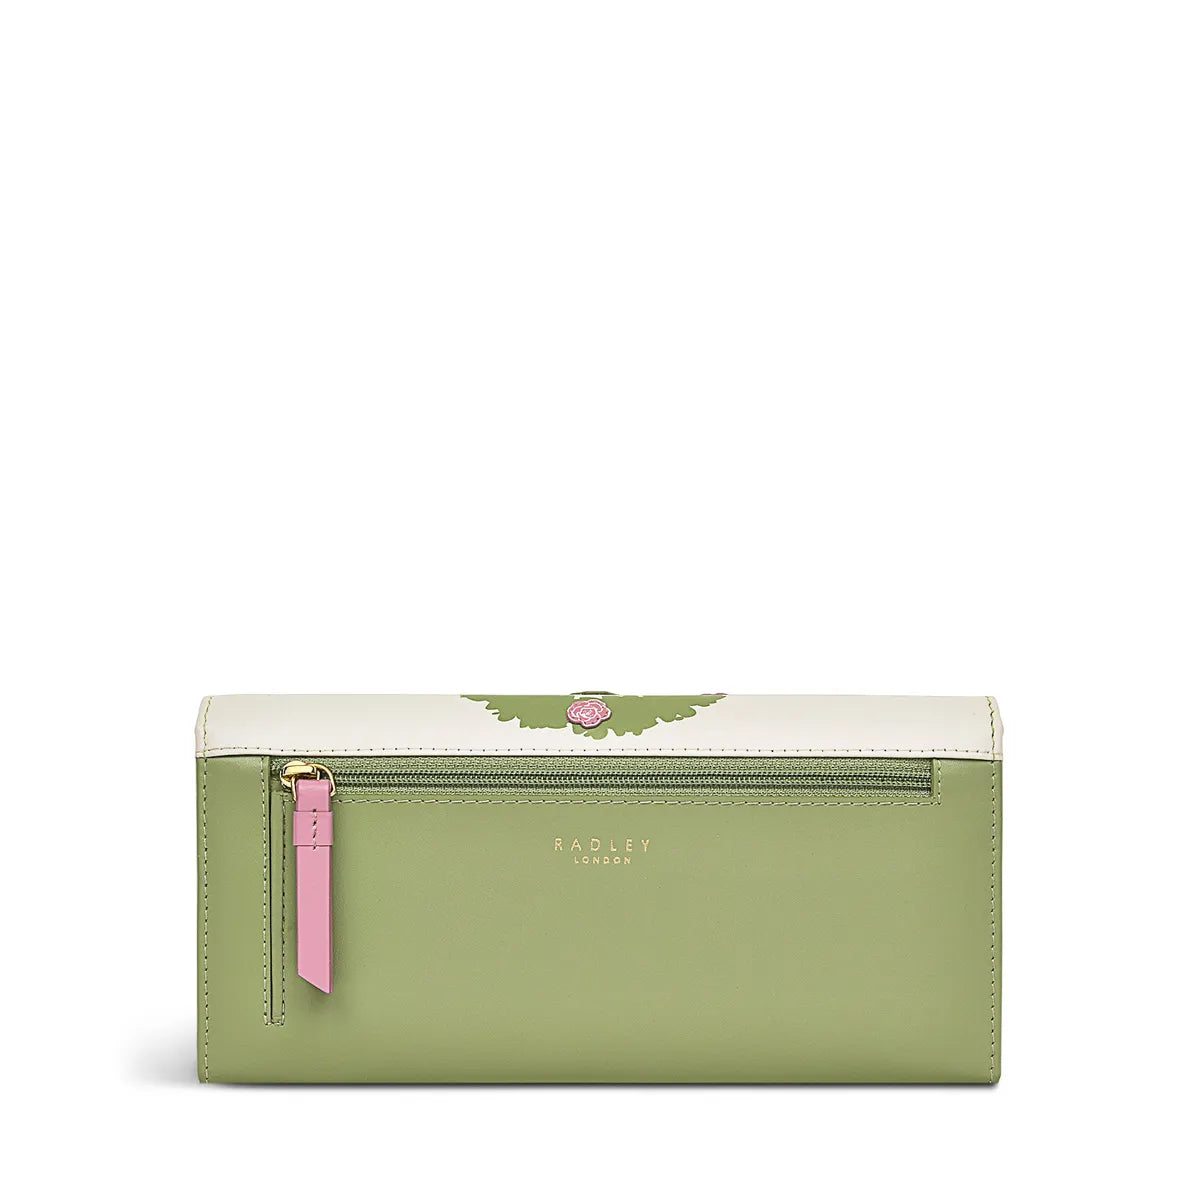 Radley S9279109 The RHS collection large flapover